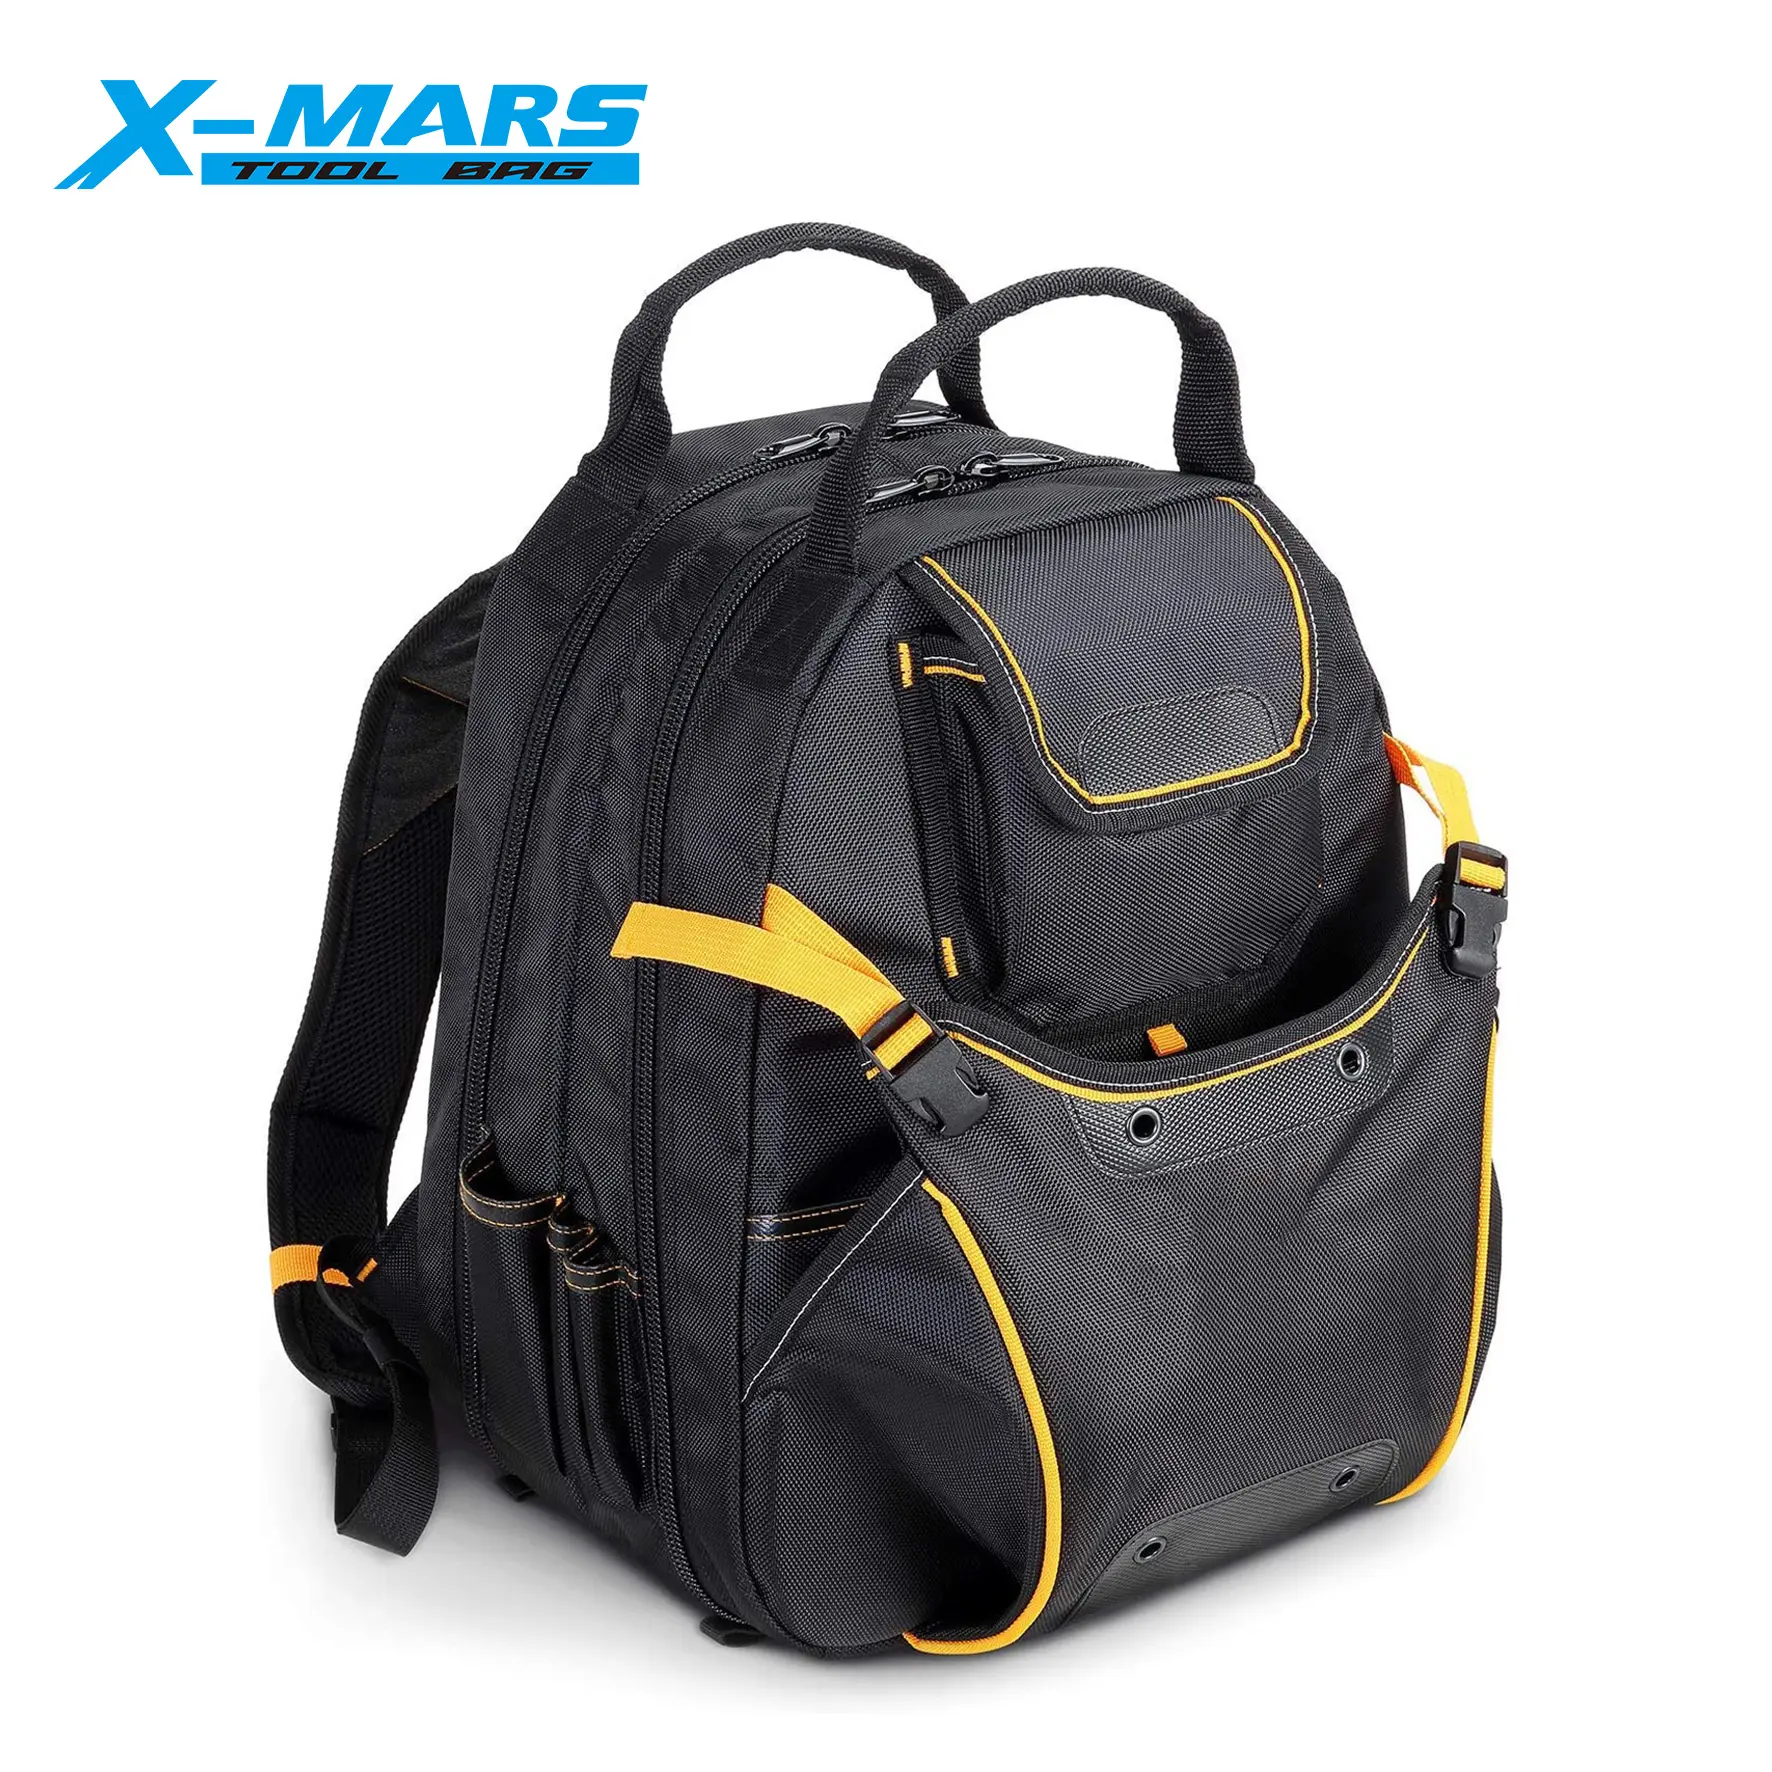 X-mars Best quality oem factory wholesale Service Technician Bag, 1-Pack backpack tool bag